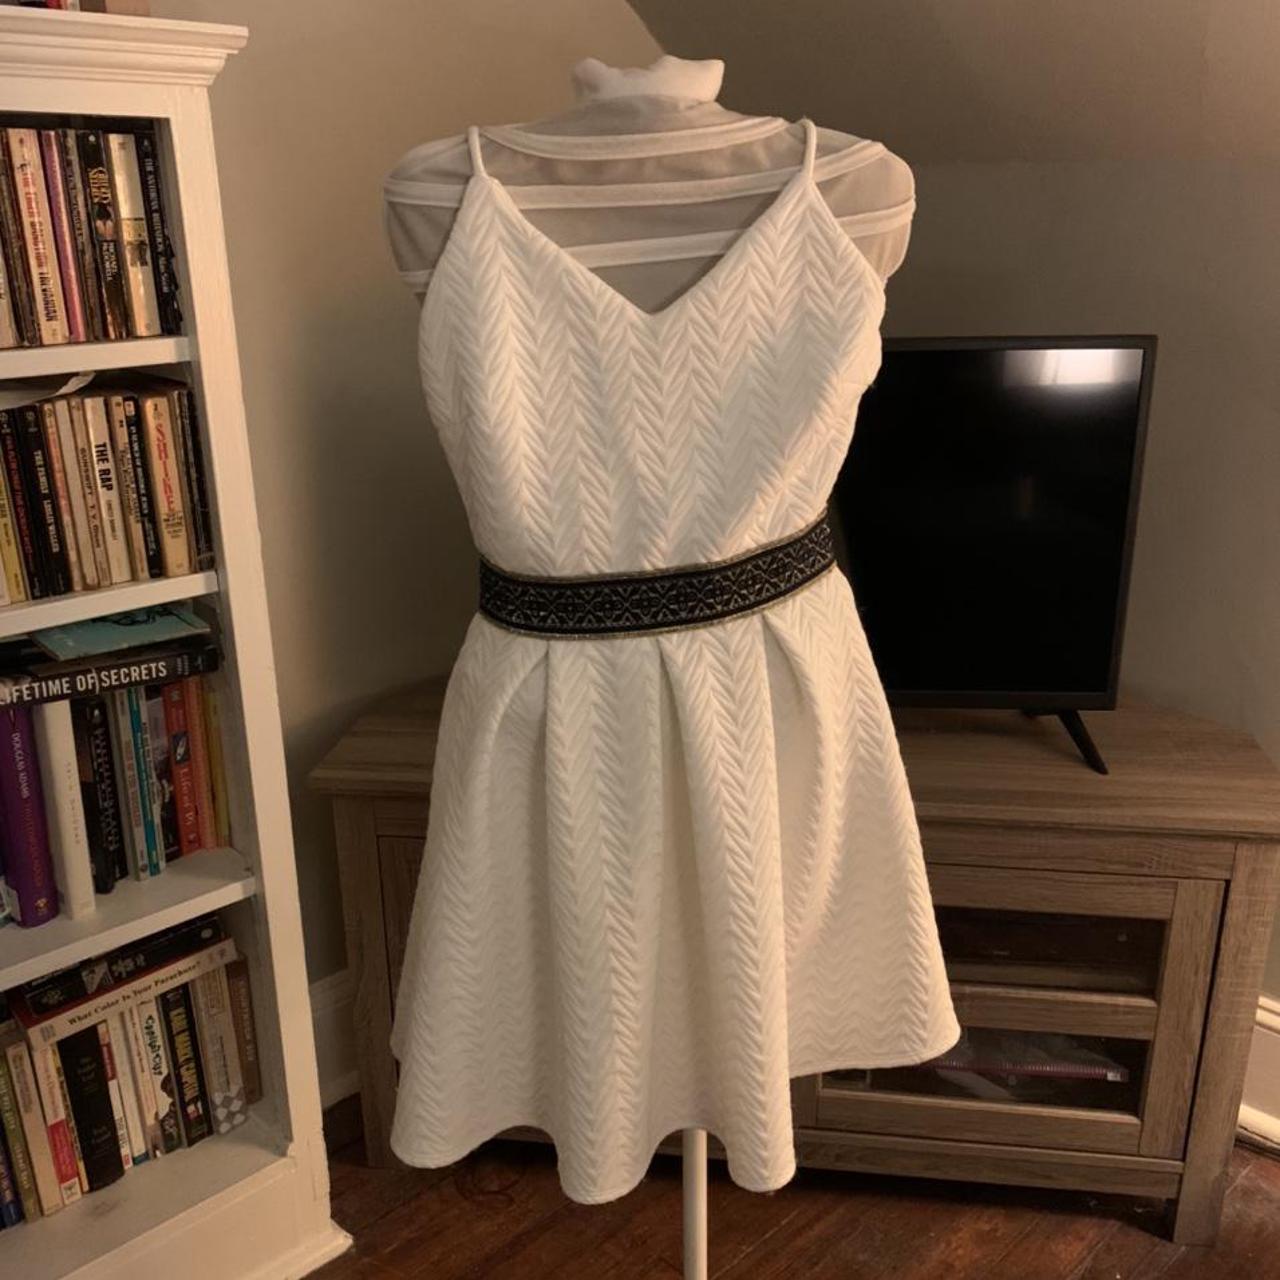 Product Image 1 - White dress
Thick and insulate great